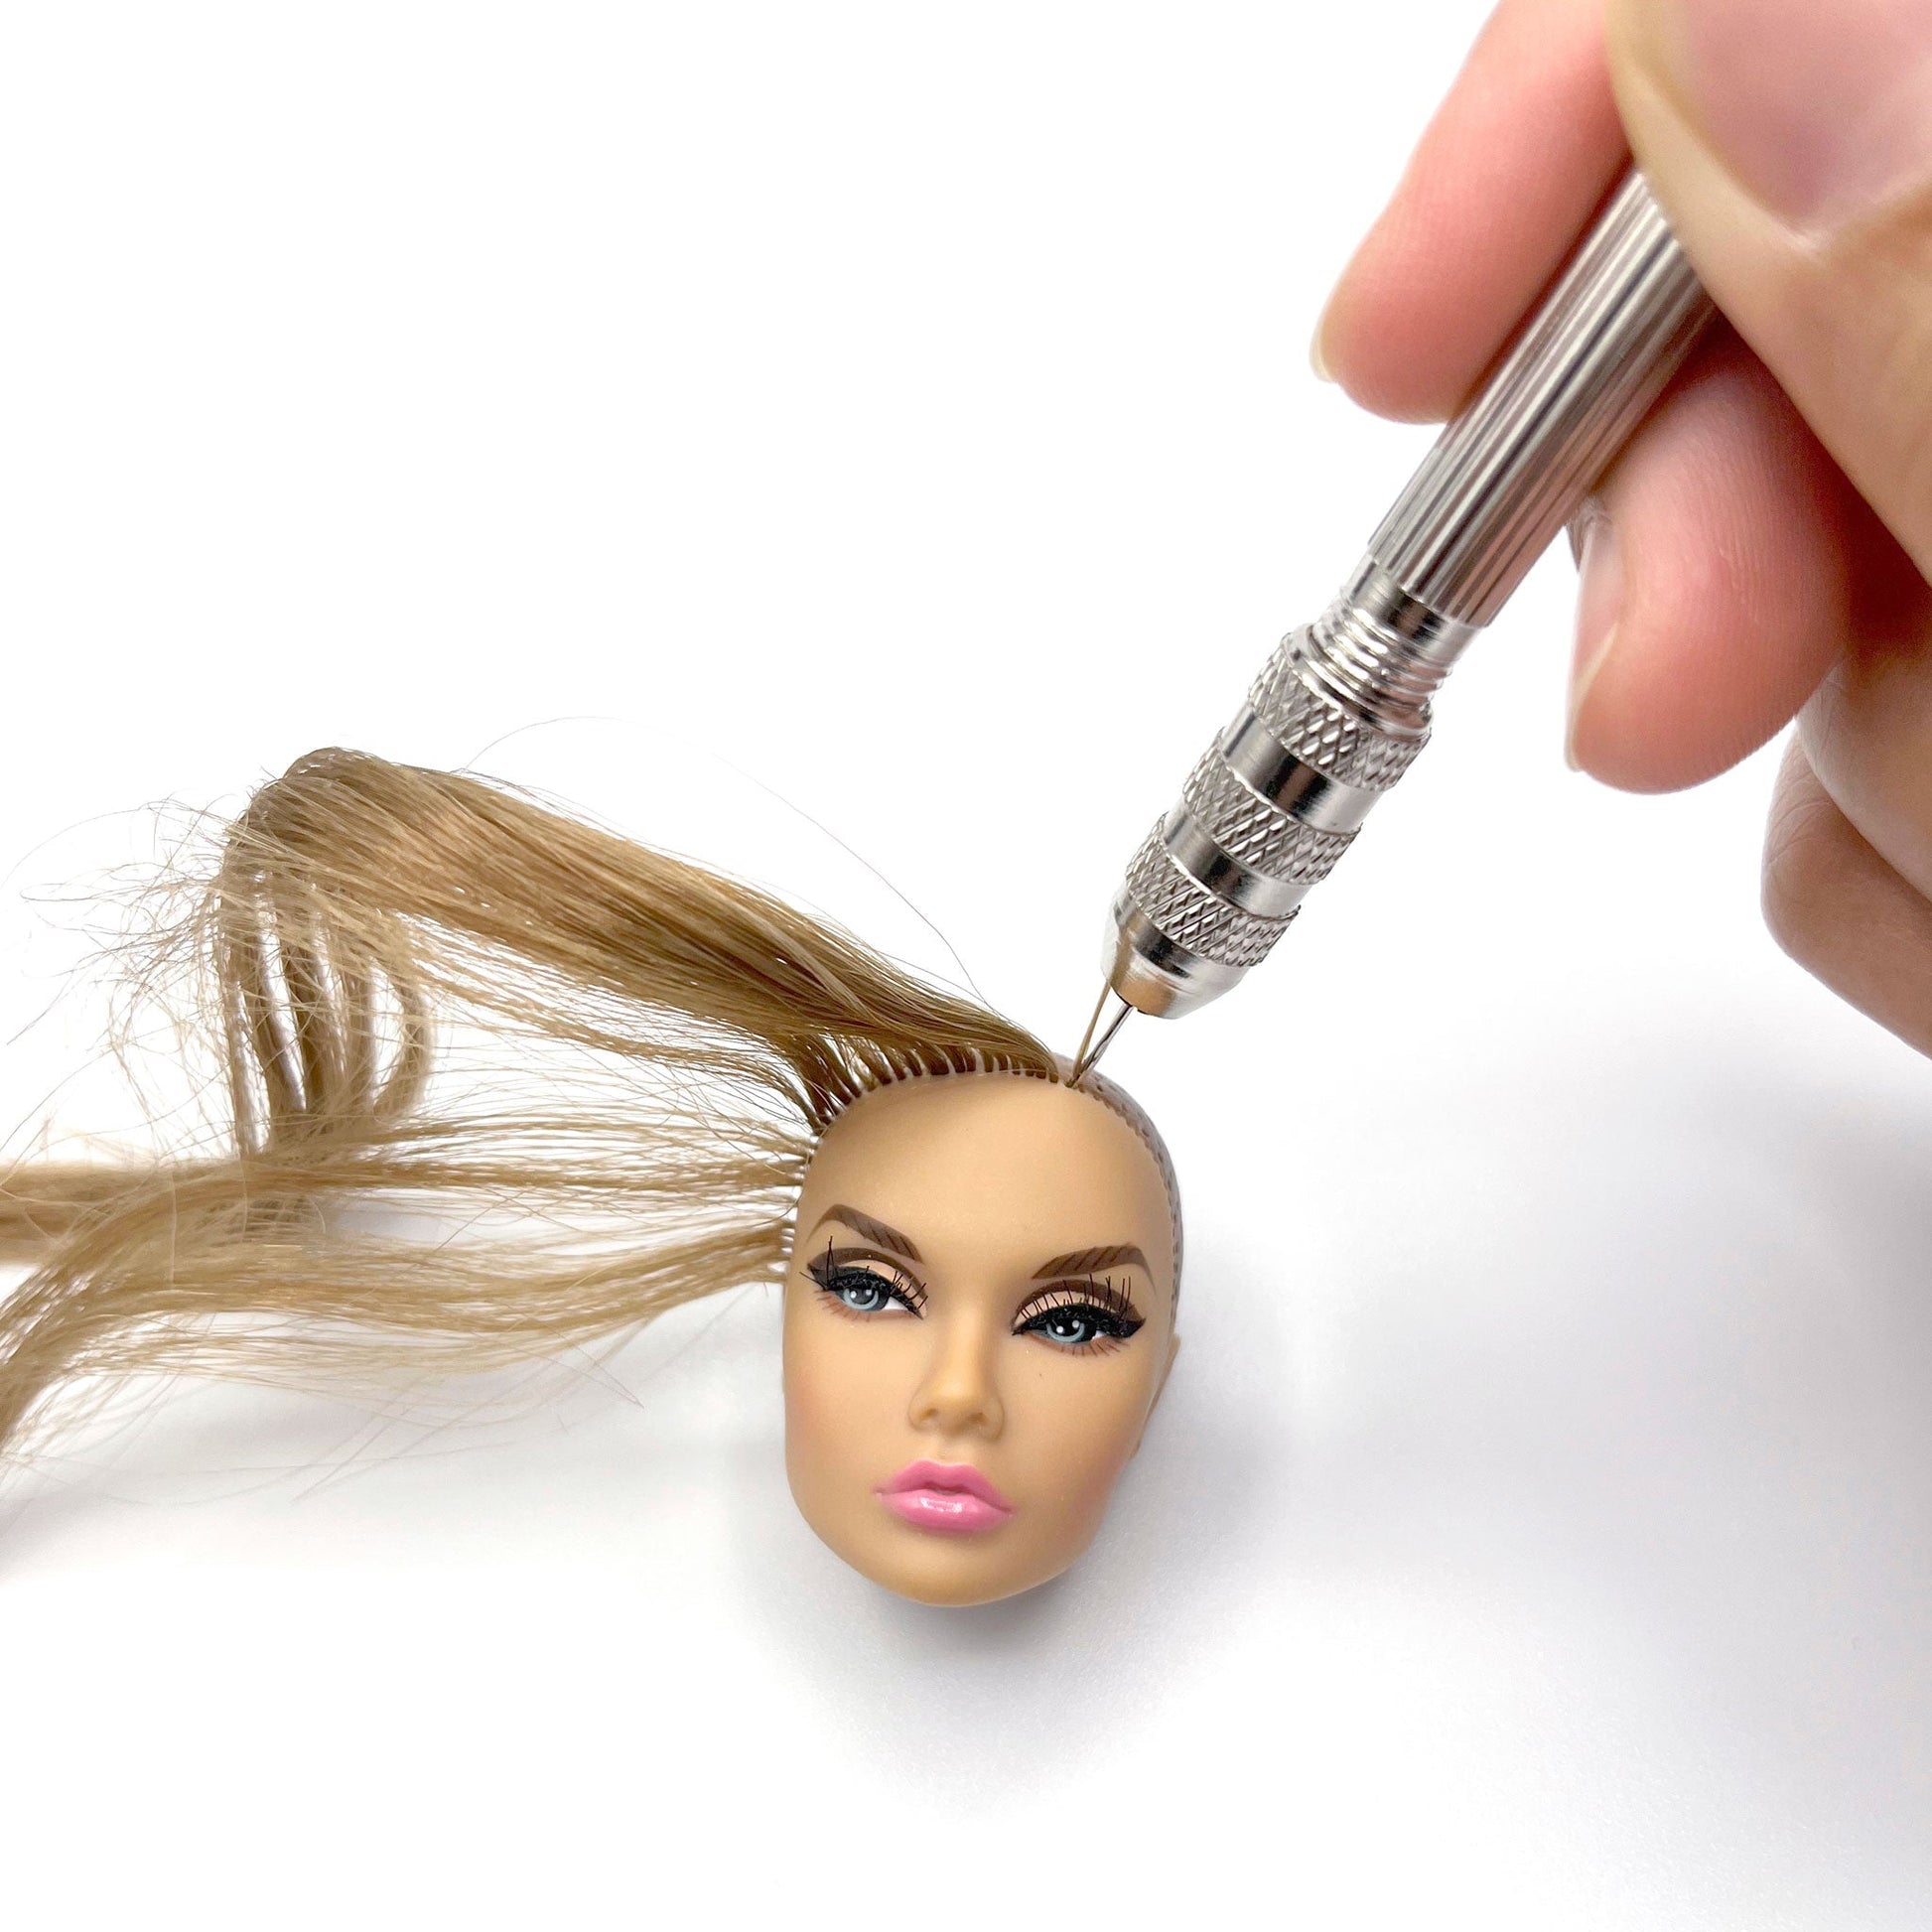 Doll Hair Blending and Styling Comb for Rerooting Fashion Dolls